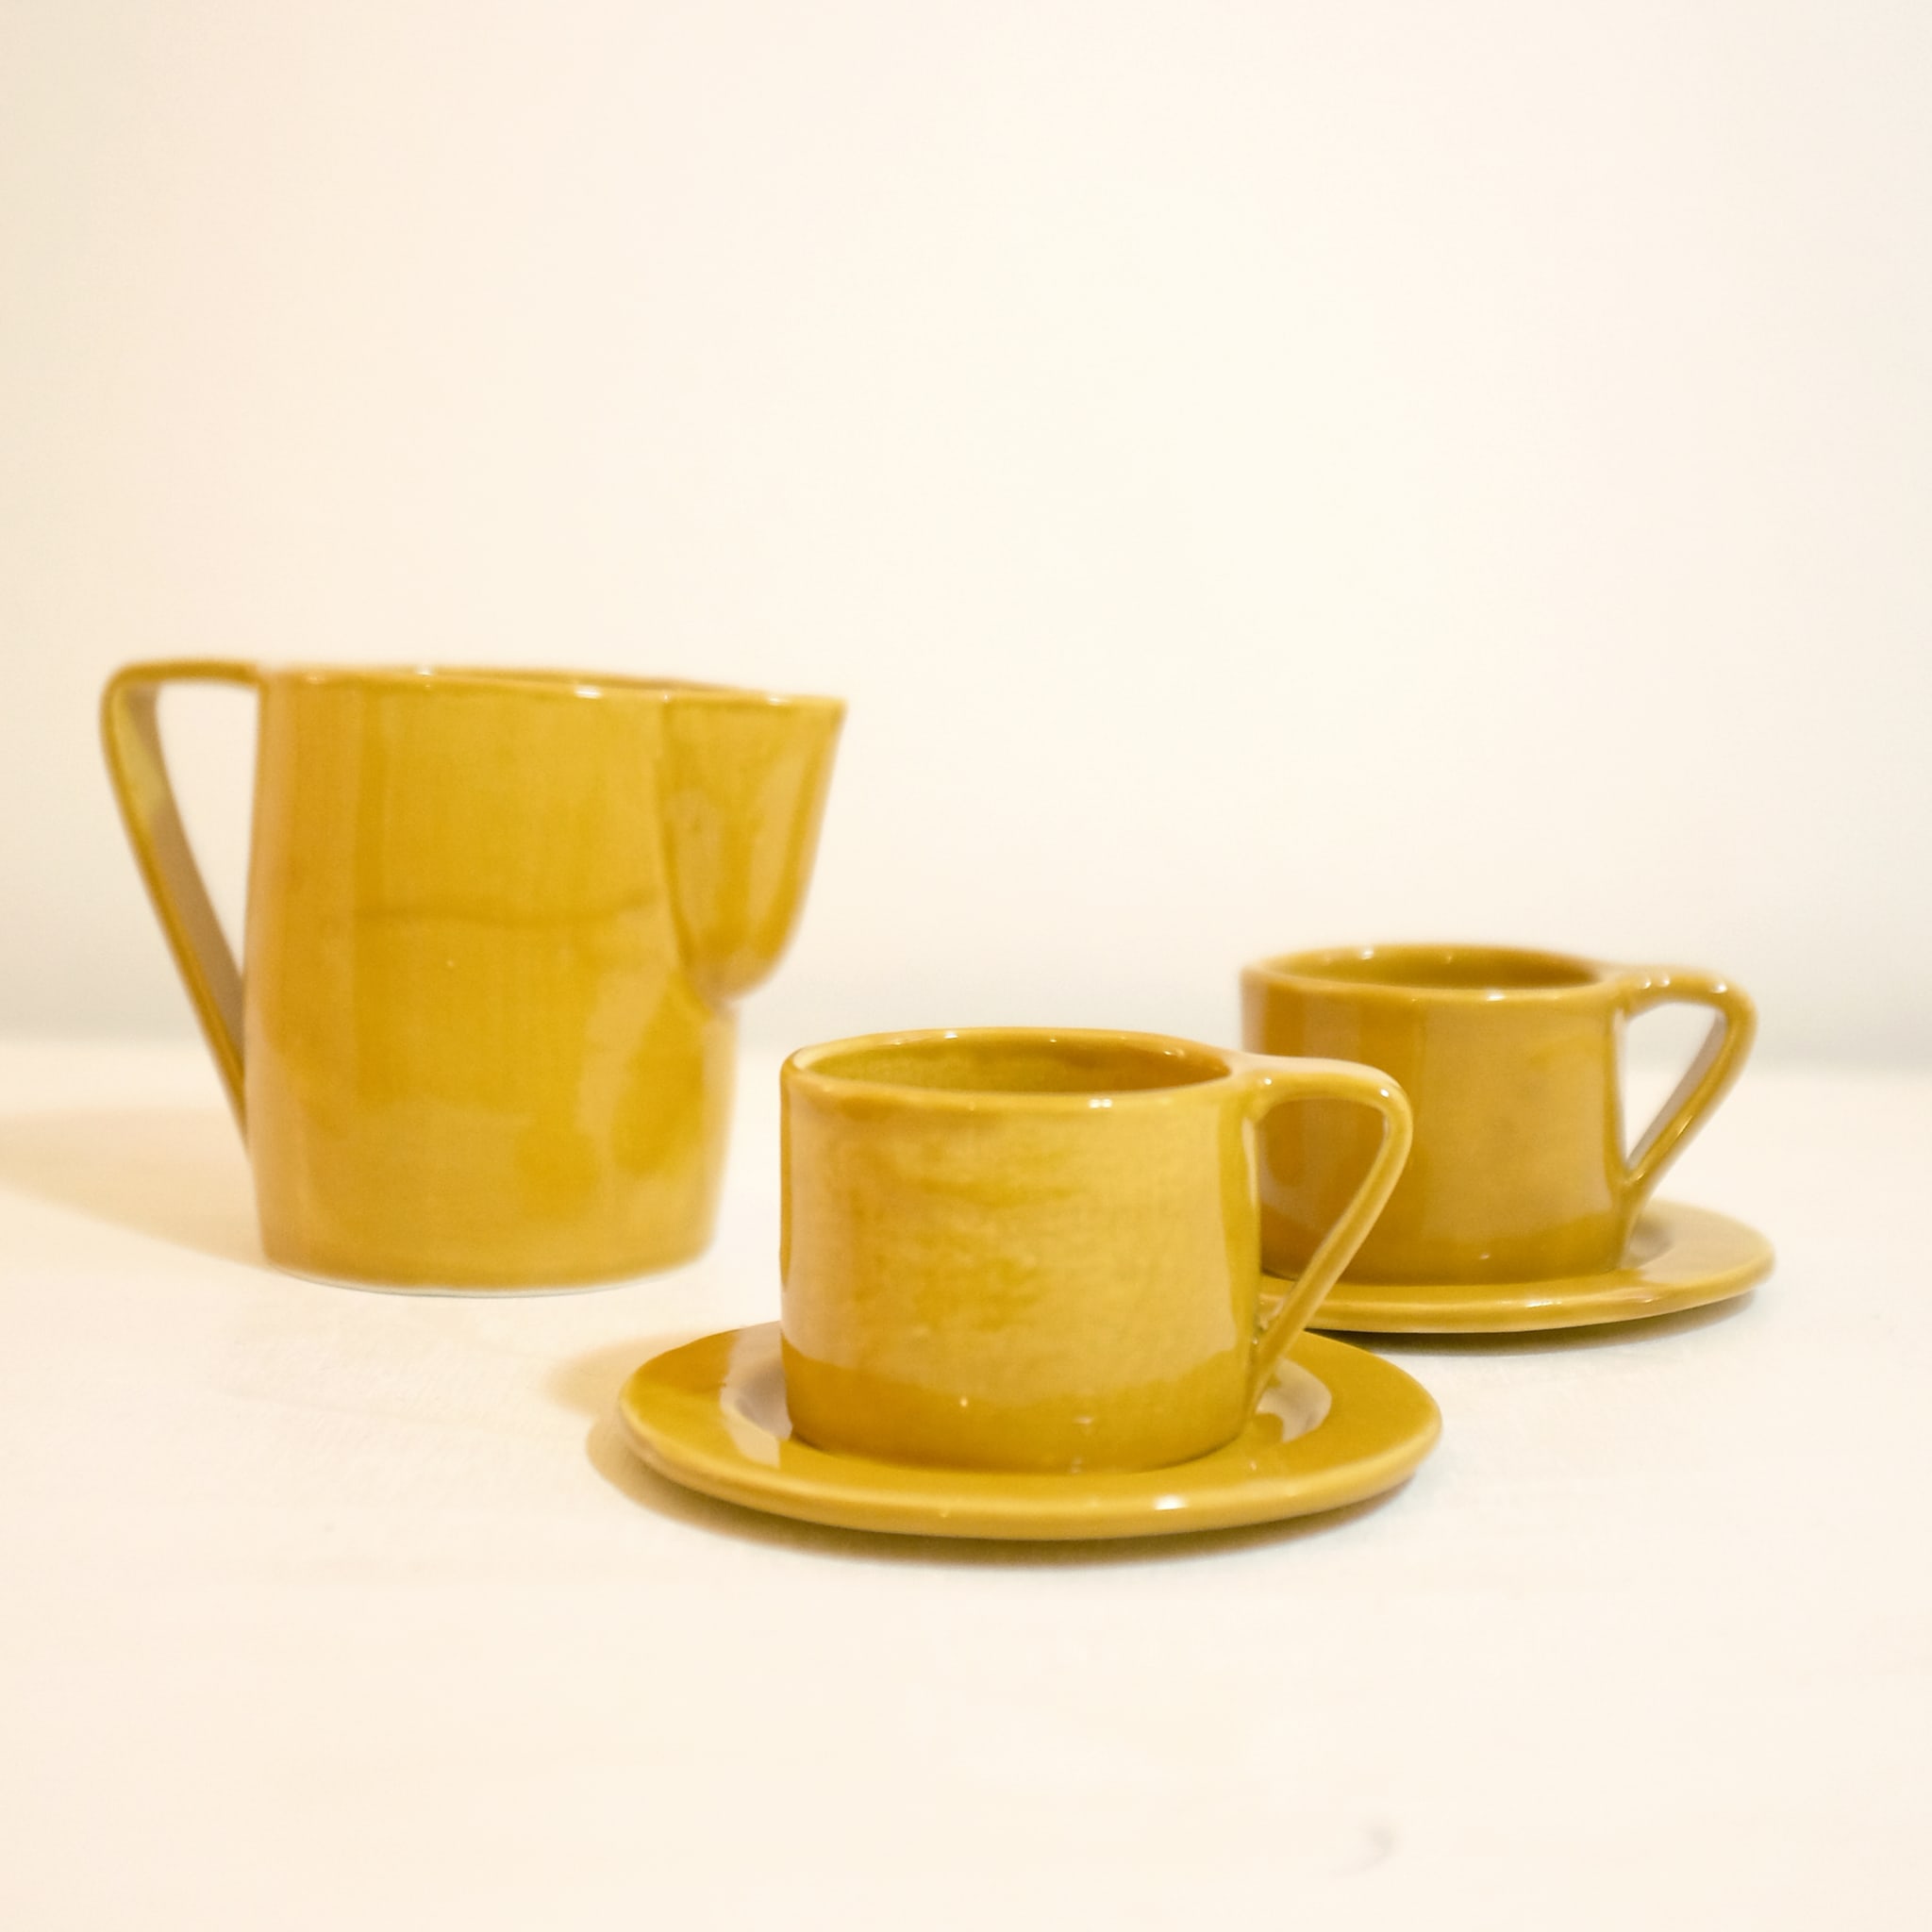 Milano Sole Set of 4 Espresso cups and saucers - Alternative view 1